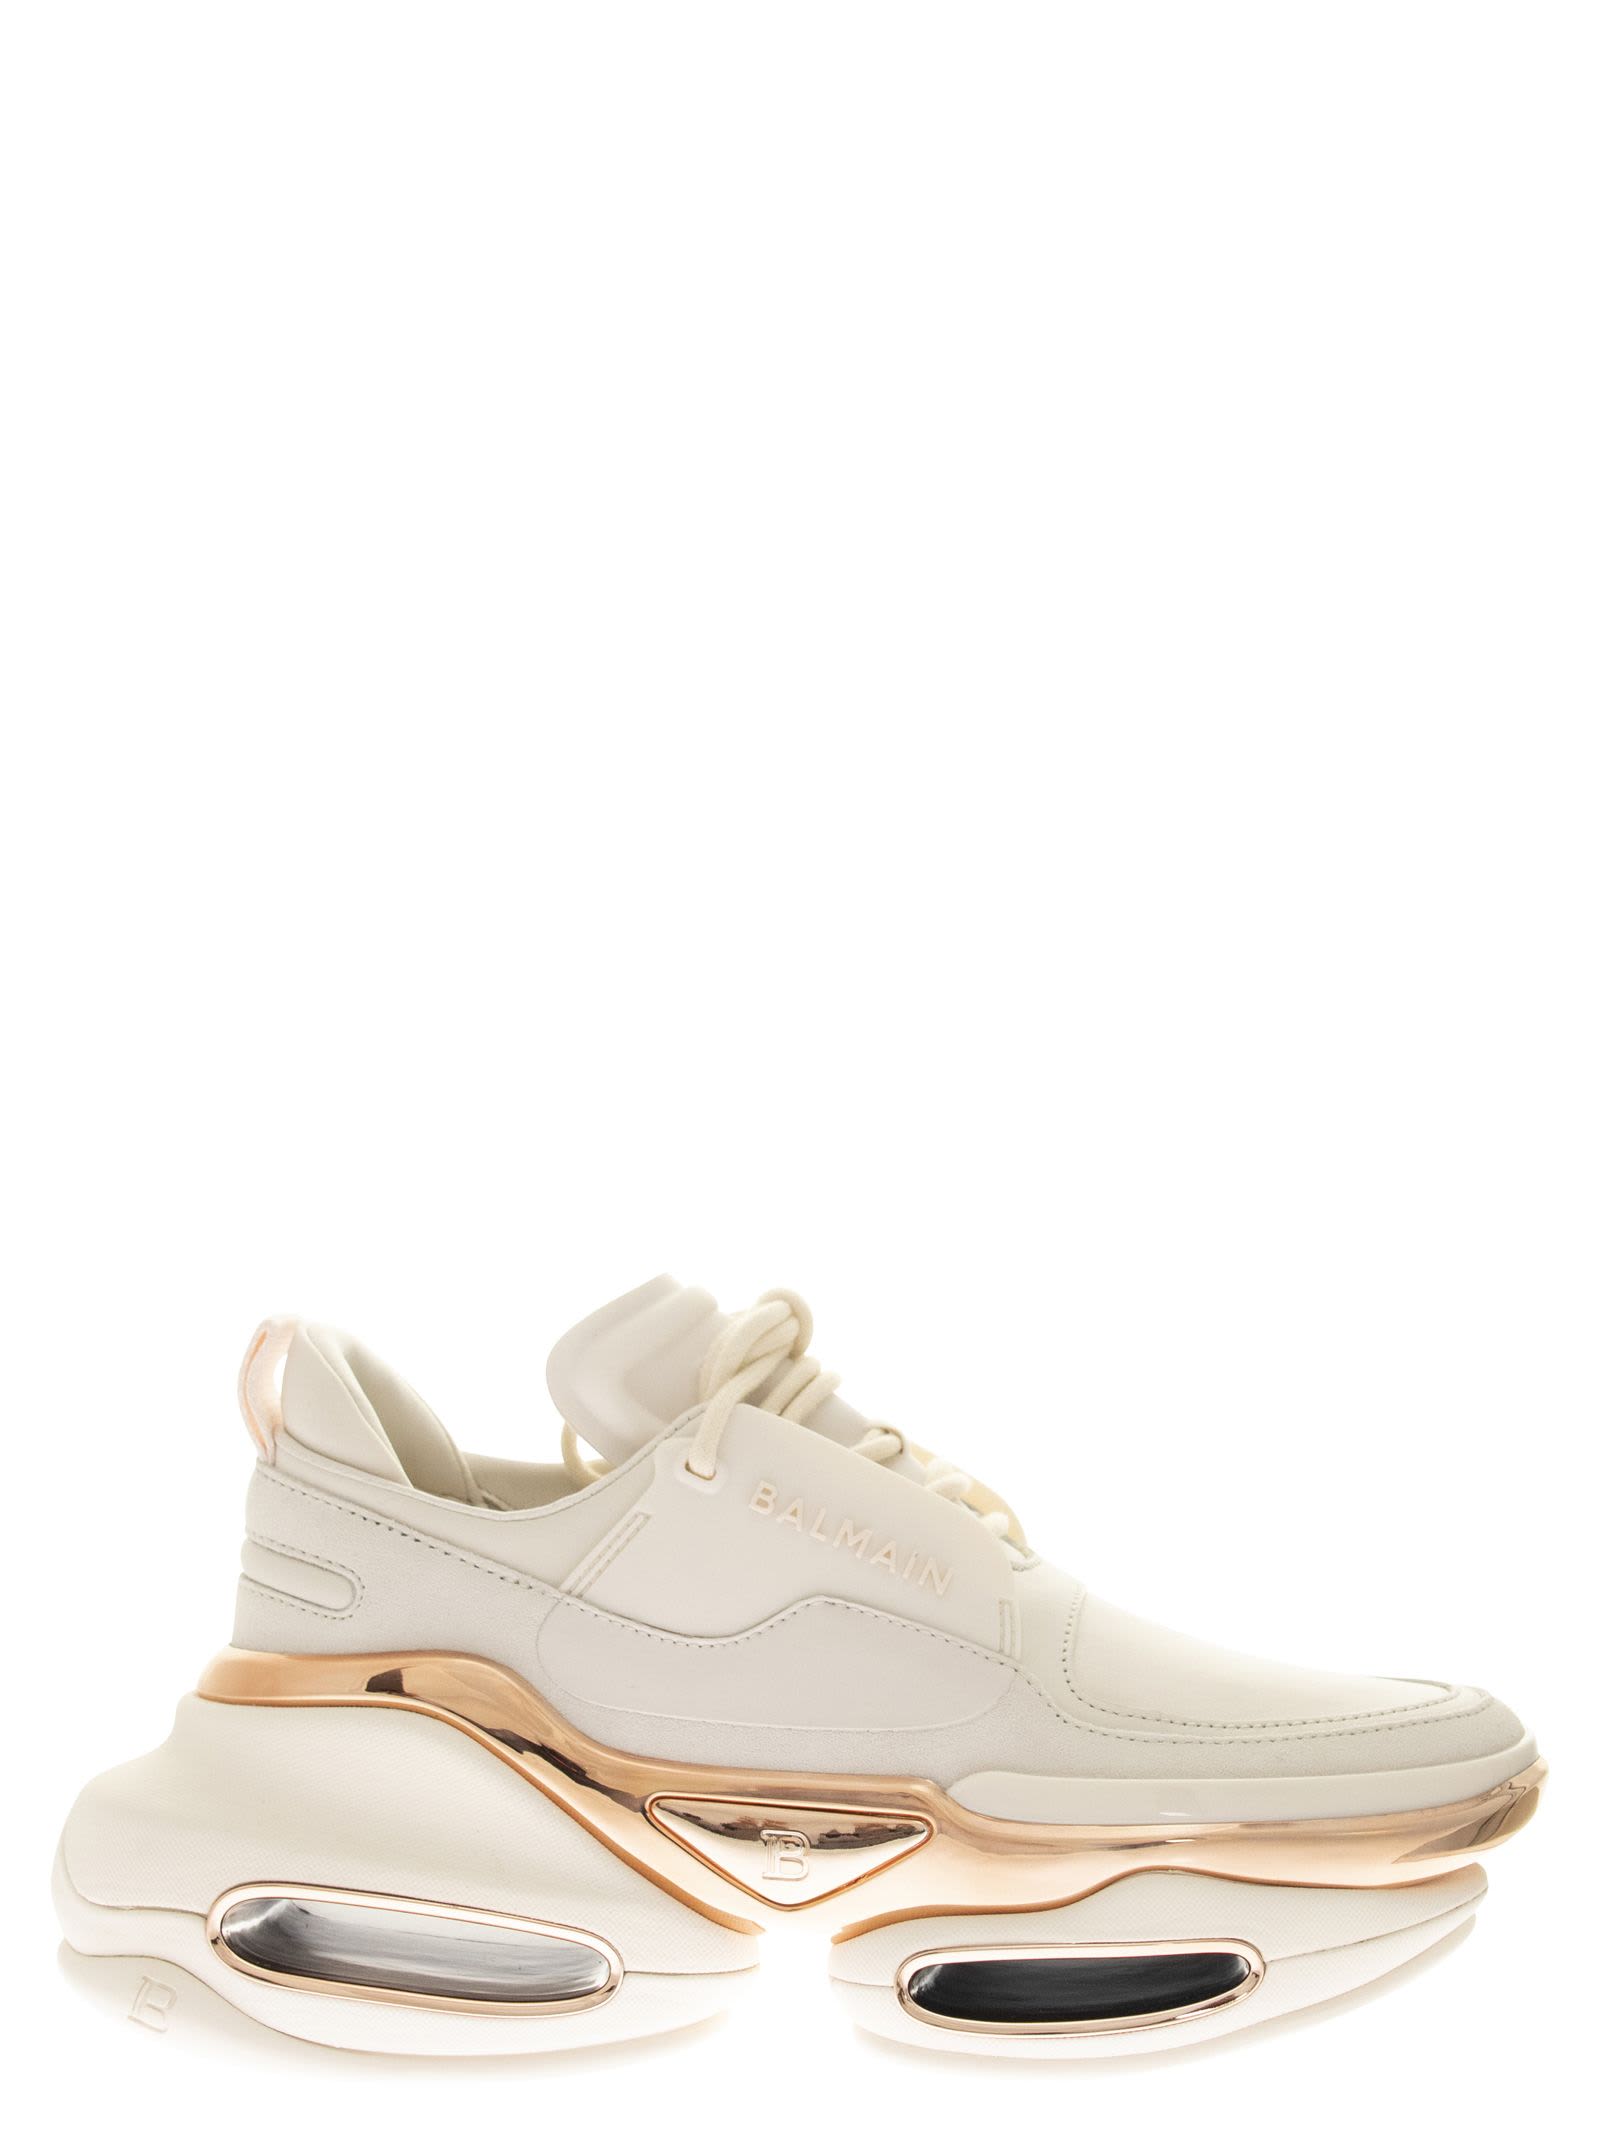 Balmain Bbold Suede And Leather Trainers